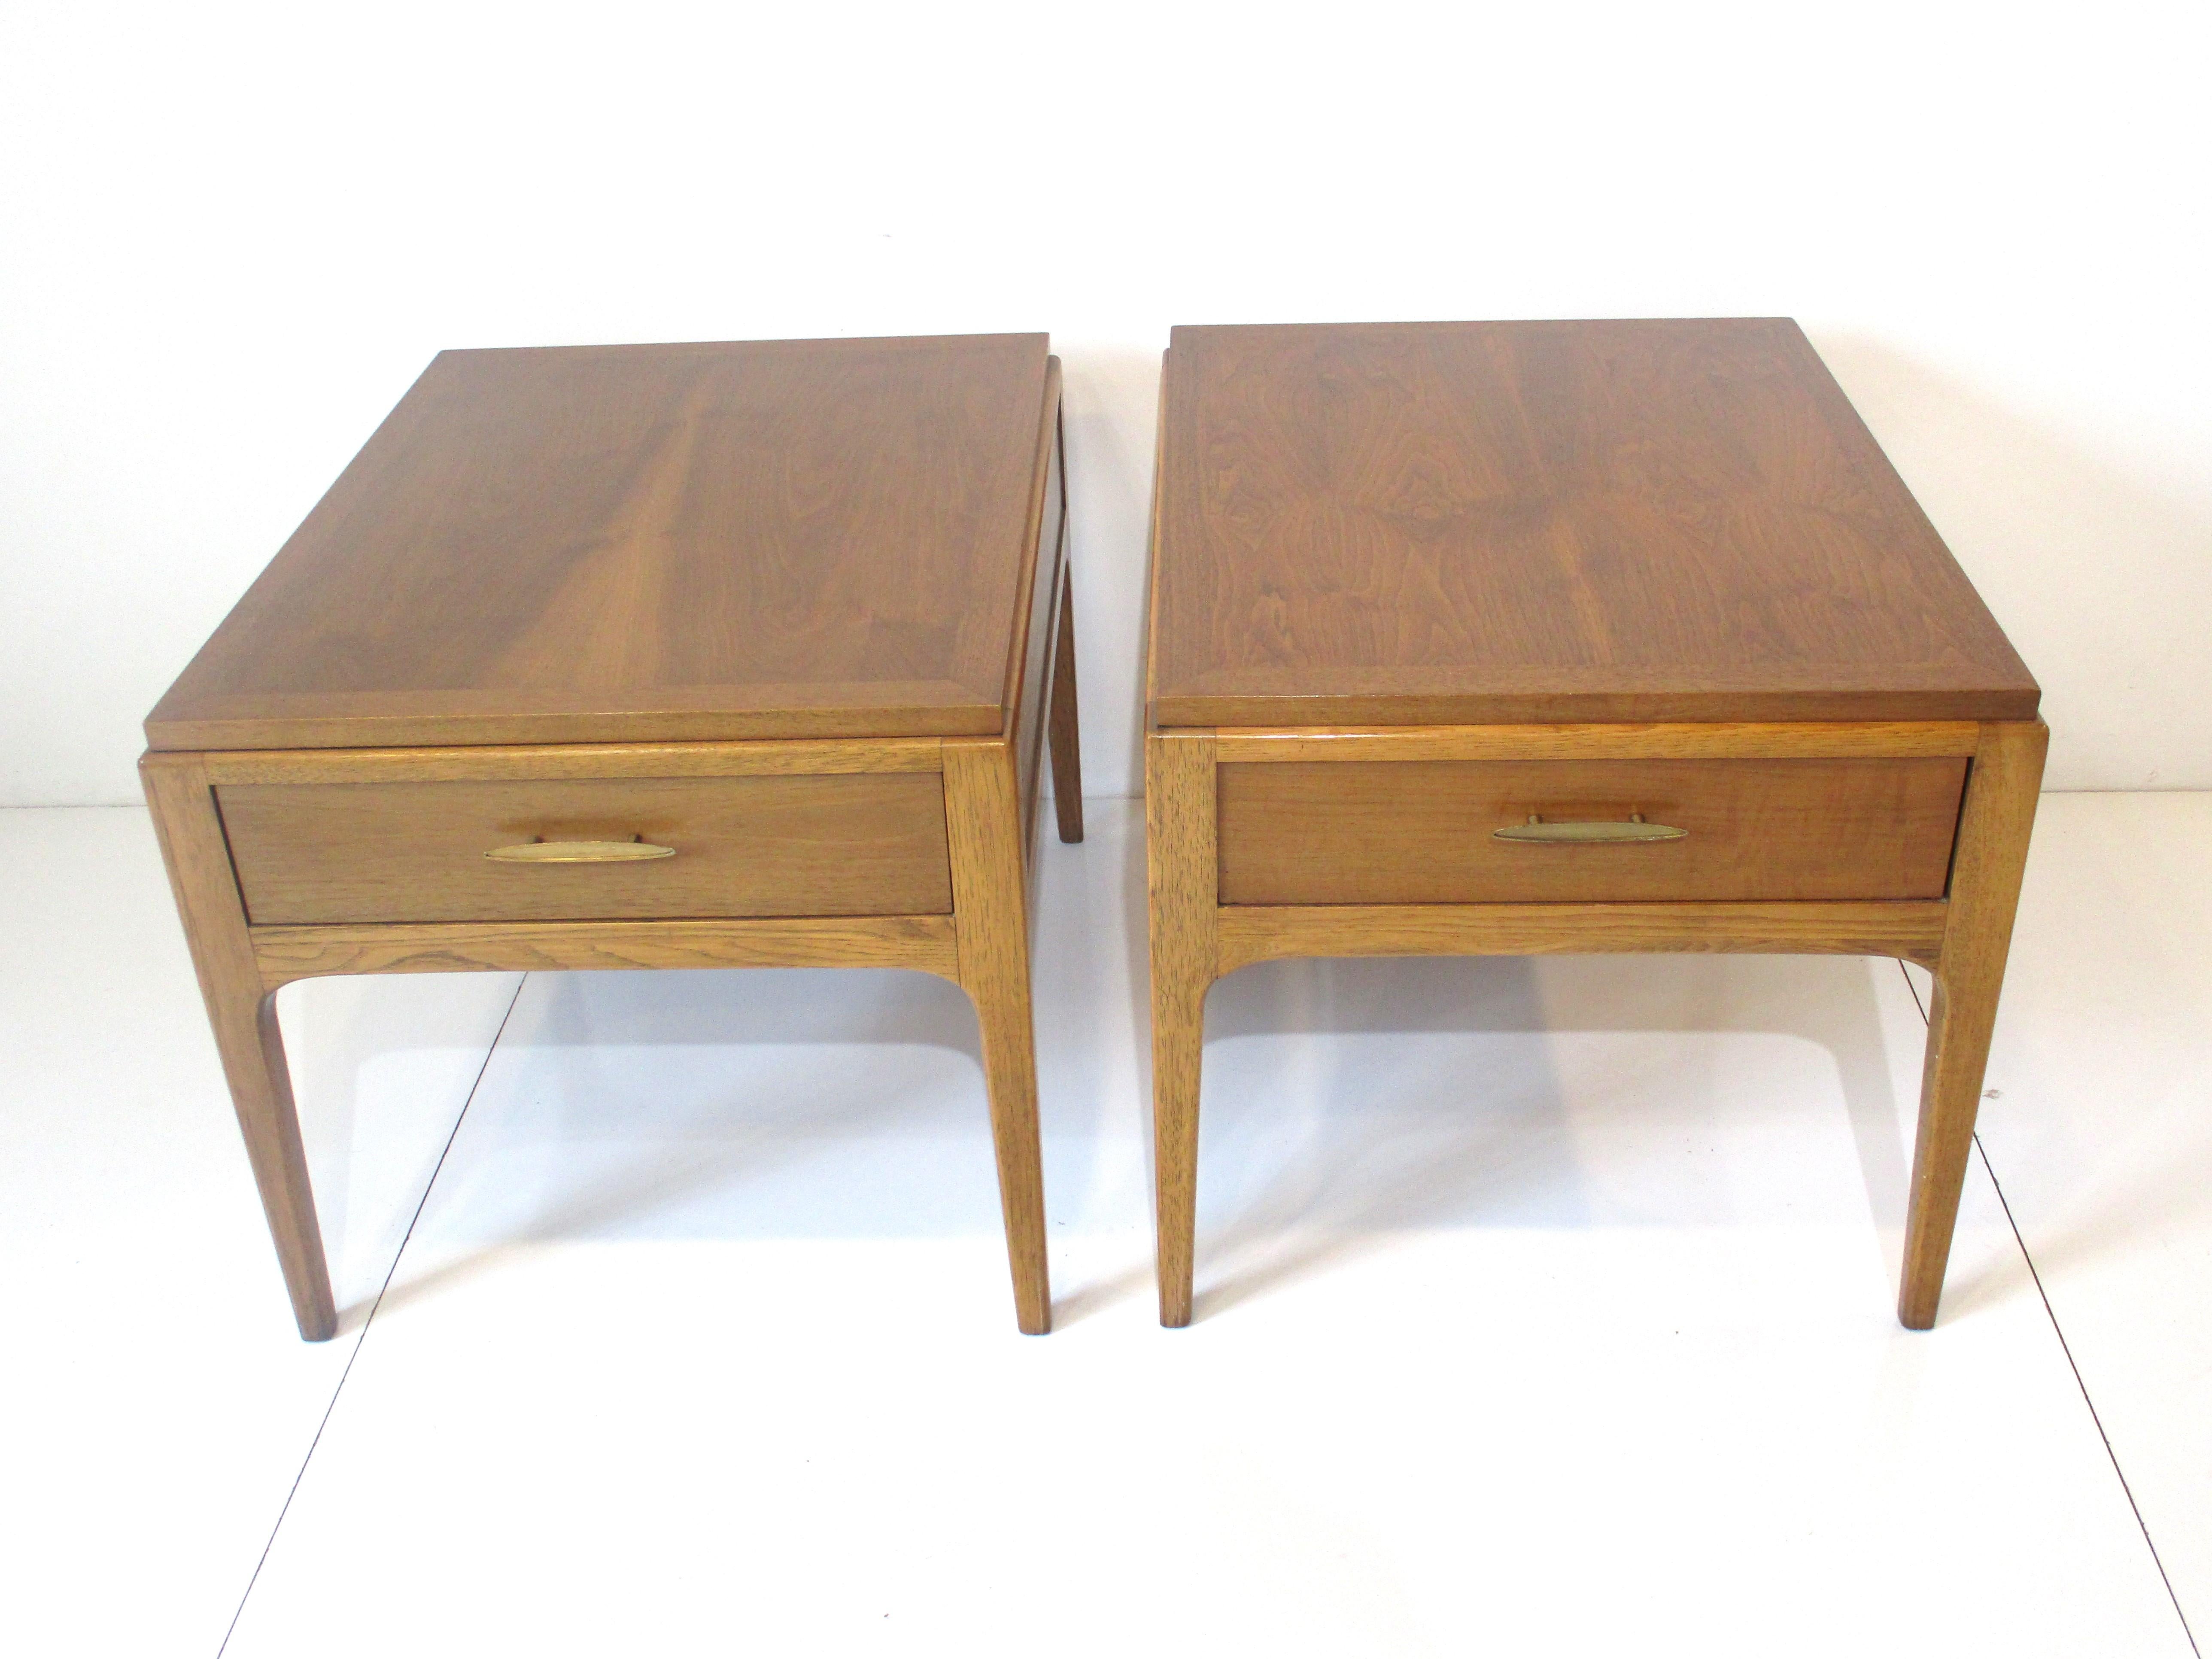 A pair of well crafted end tables with walnut tops and mahogany frames sitting on tapered legs each piece with a single drawer and bronze styled pulls. Manufactured and designed by Altivasta Lane from their Rhythm Collection.